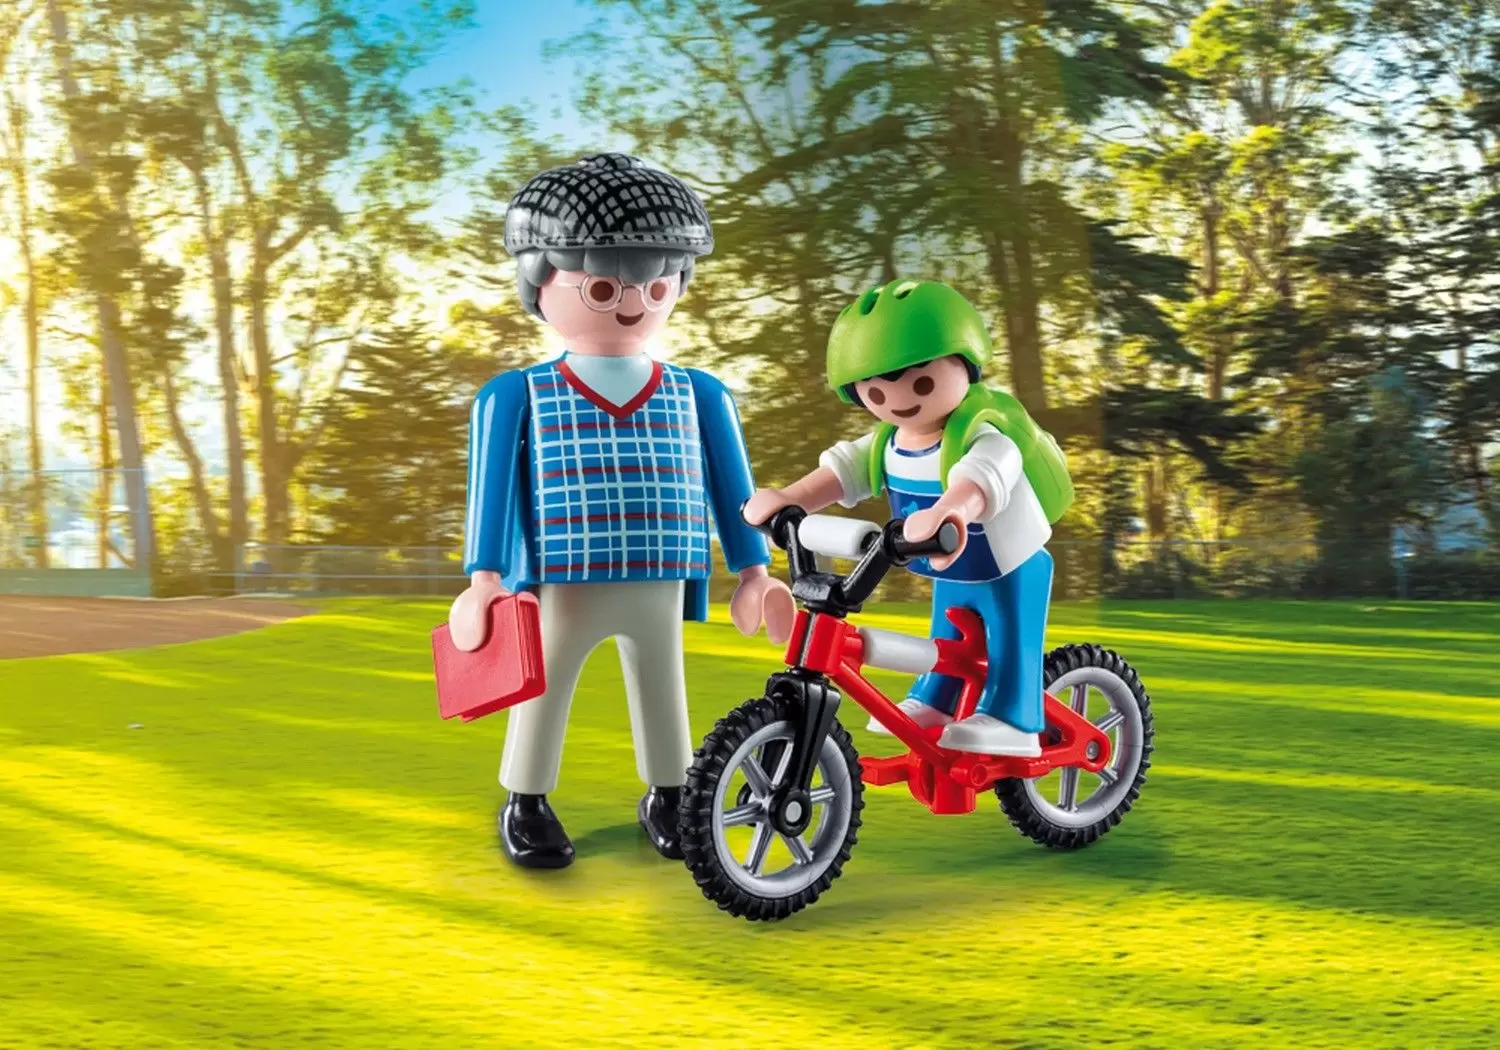 Playmobil Play + Give Exclusives - Grandpa + boy with bicycle